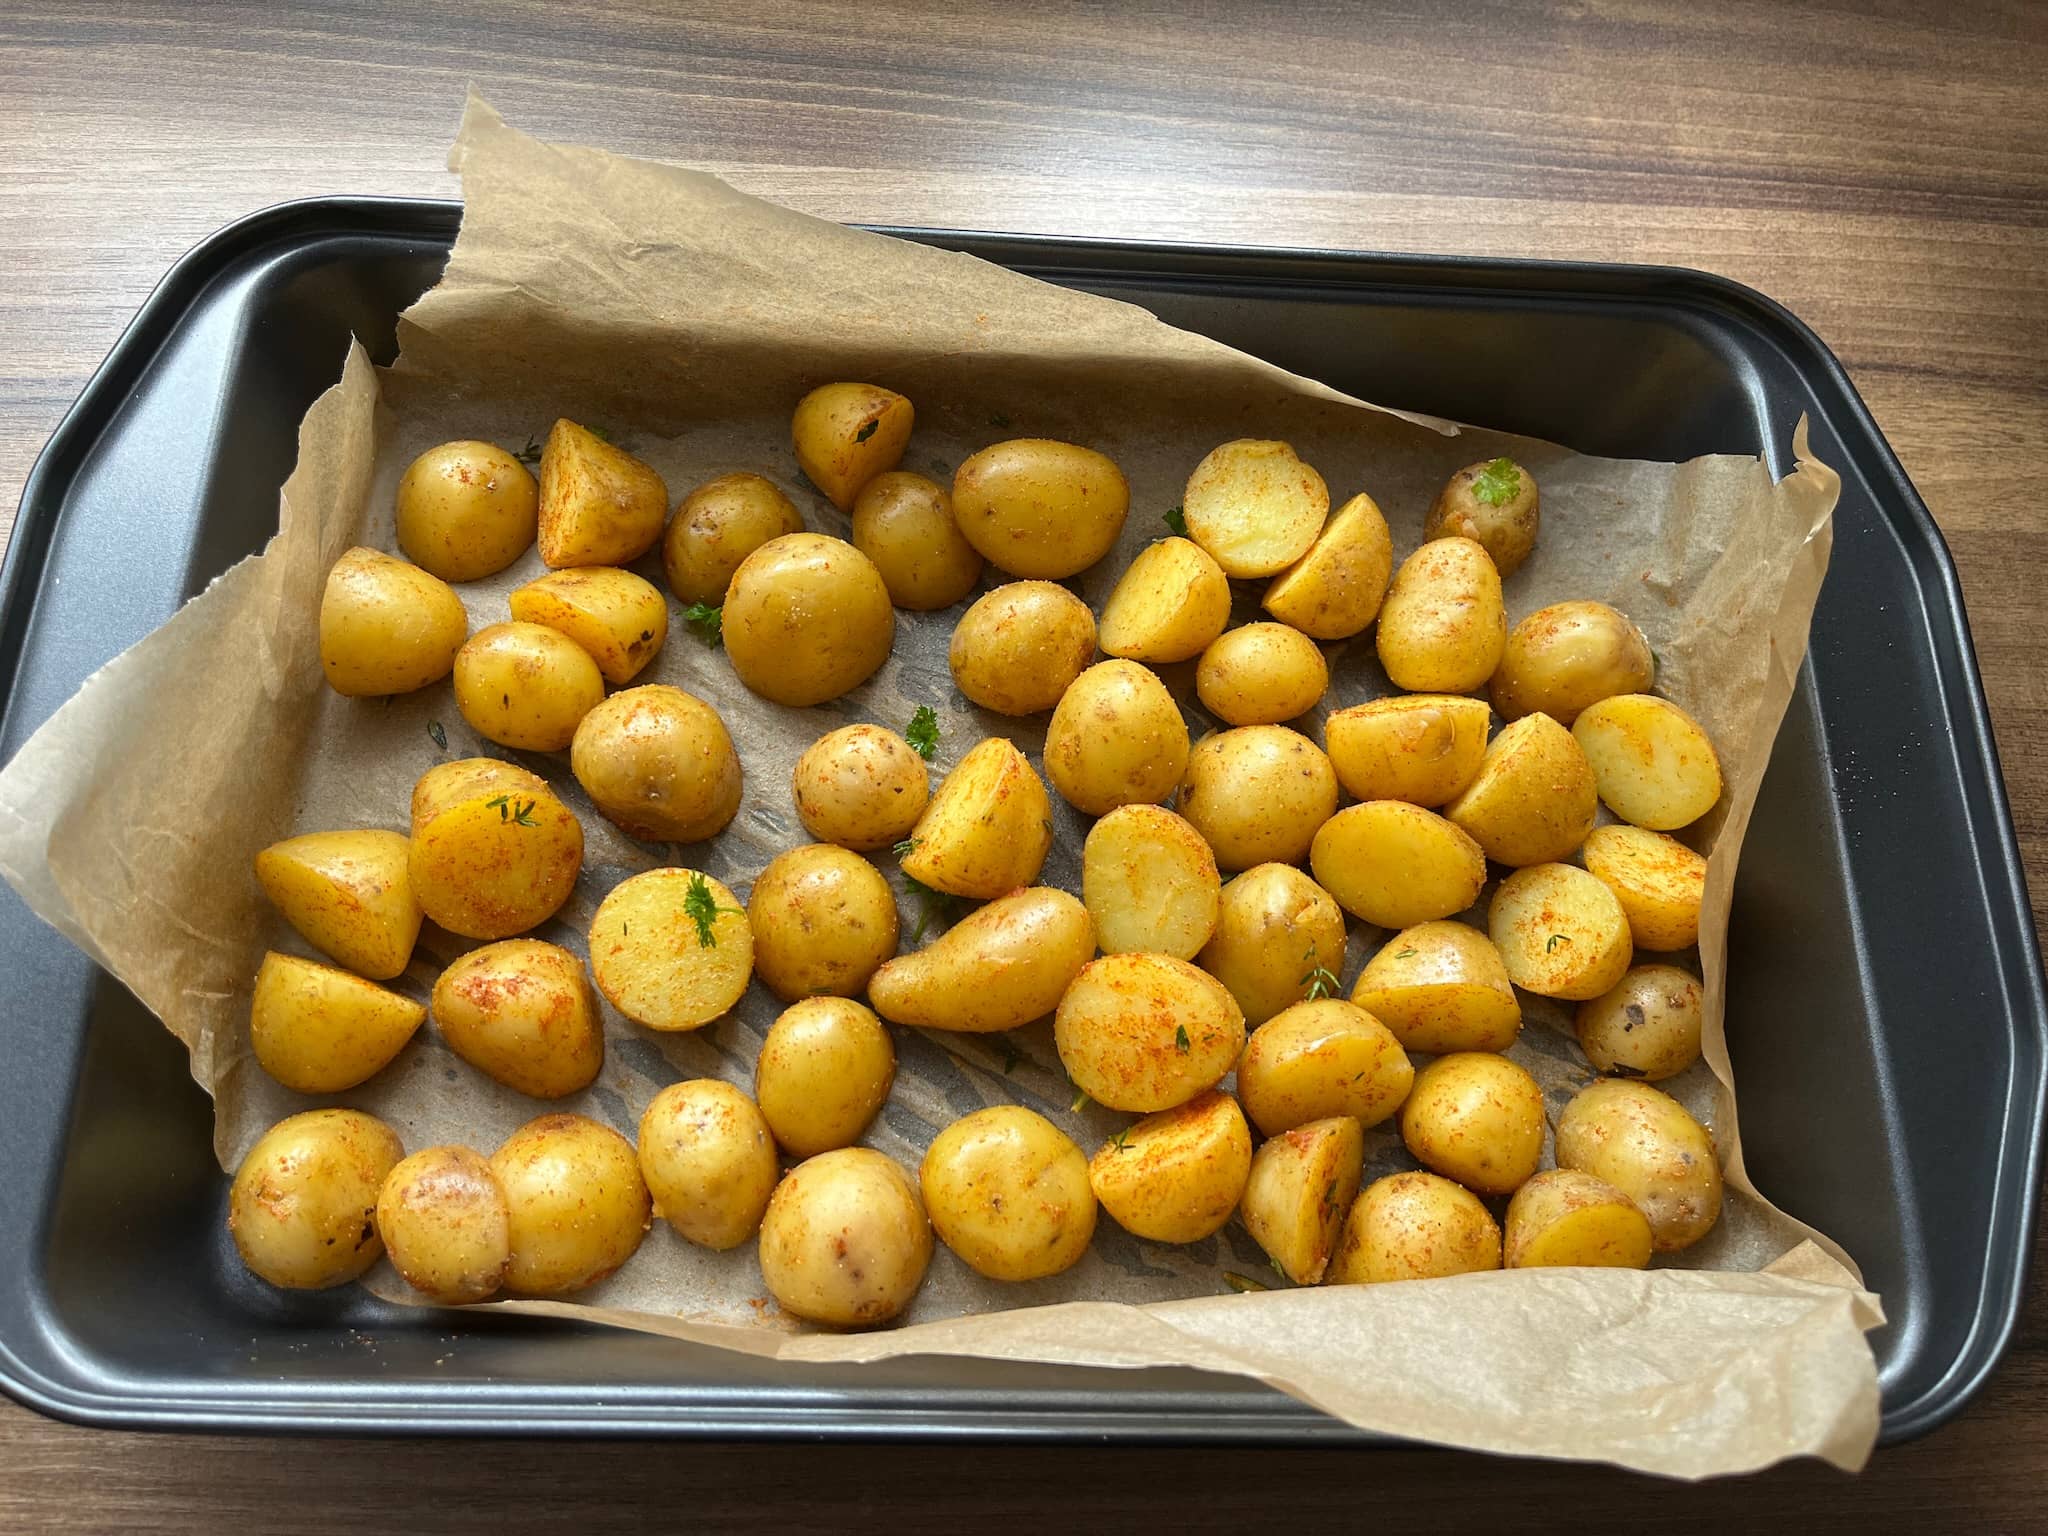 New Potatoes on a baking tray just before baking